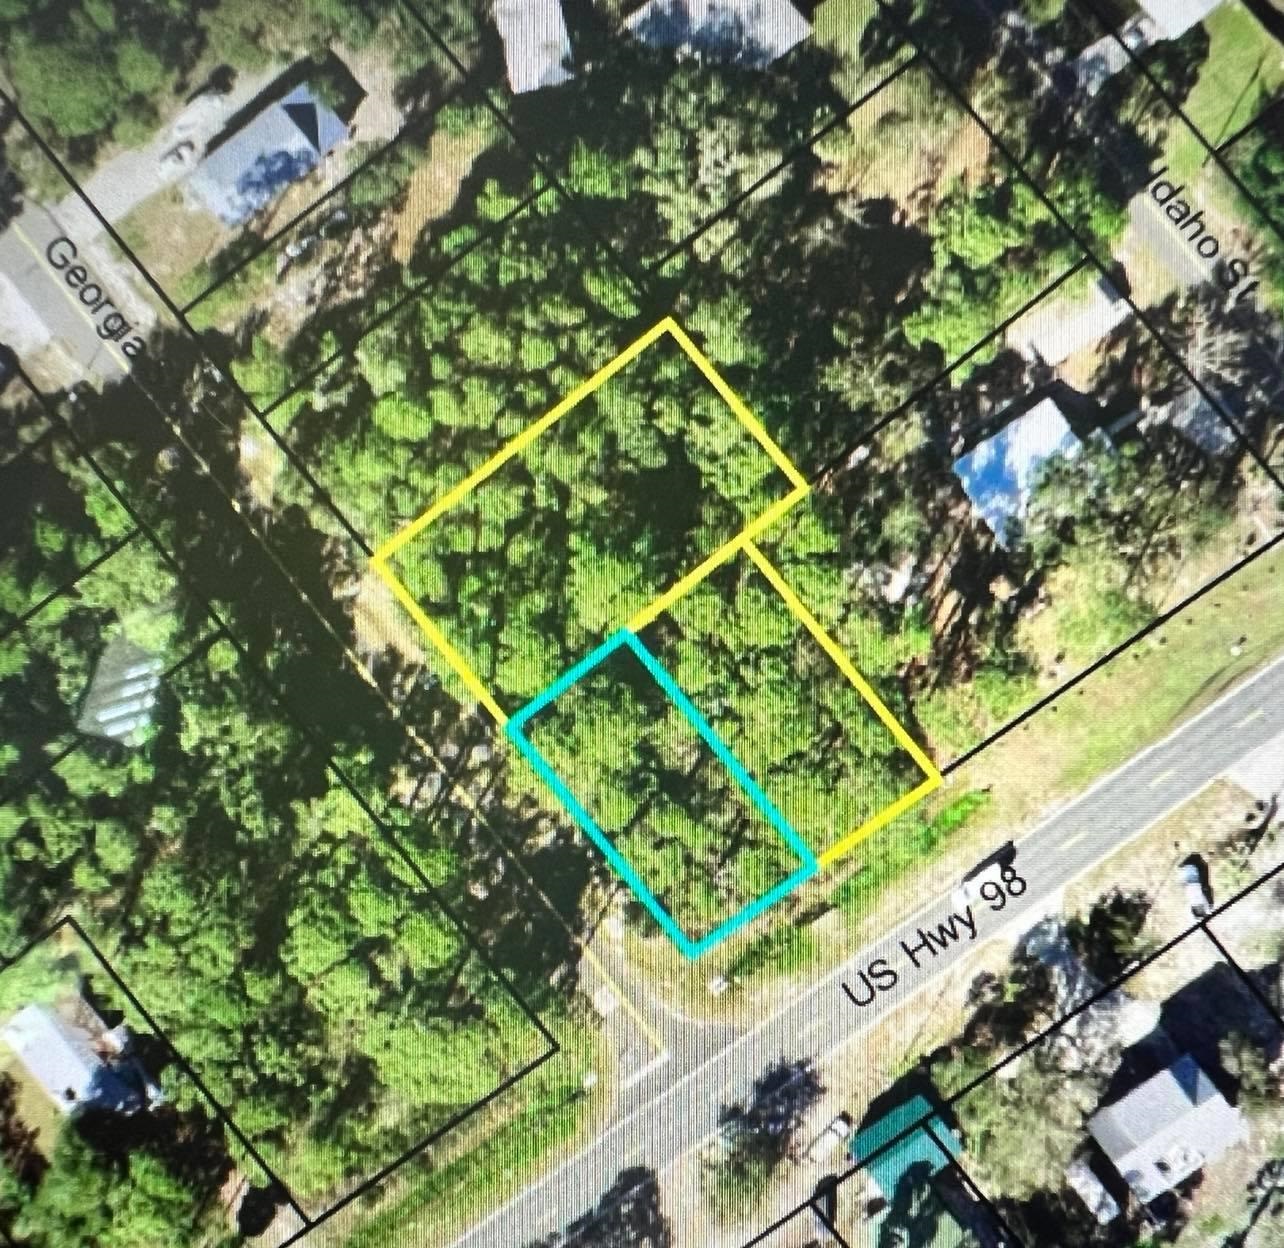 Raw land ready for developing.  Across highway 98 is a beautiful view of the Gulf of Mexico.  There are 3 lots, 0.45 acre, seller will not divide, dimensions are as follows:  Lot 20: 55 x 116 - AE & VE Flood Zone Lot 21: 50 x 140 - AE & VE Flood Zone Lot 22: 112 x 5 - X Flood Zone